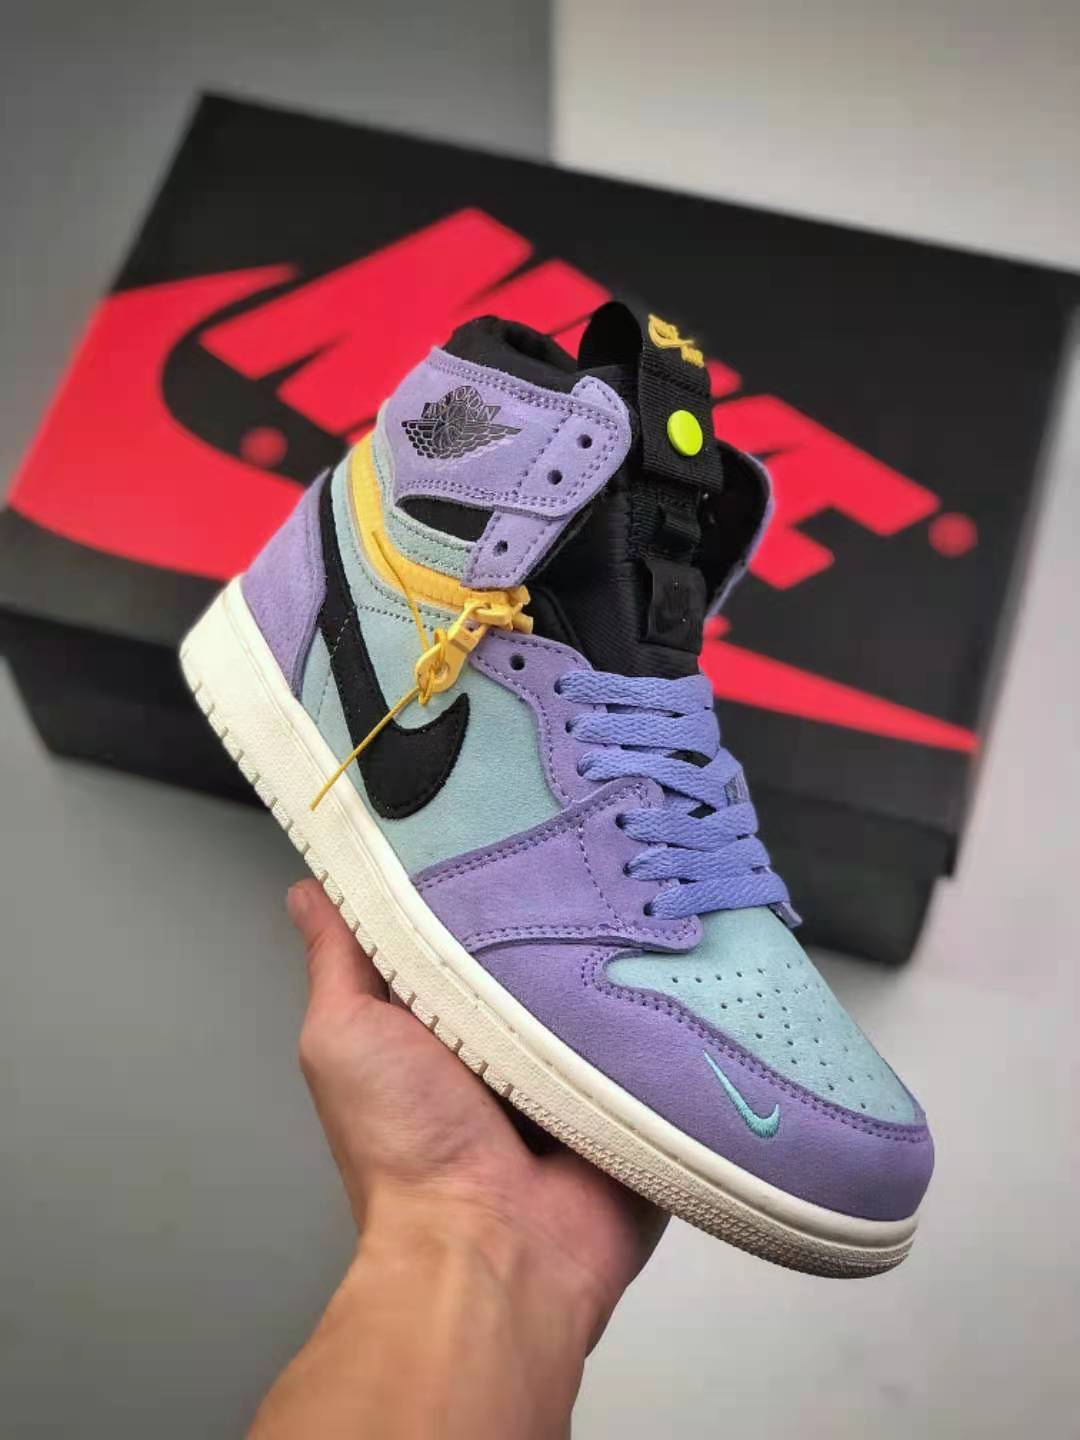 Air Jordan 1 High Switch 'Purple Pulse' CW6576-500 - Authentic Jordan Sneakers at Competitive Prices